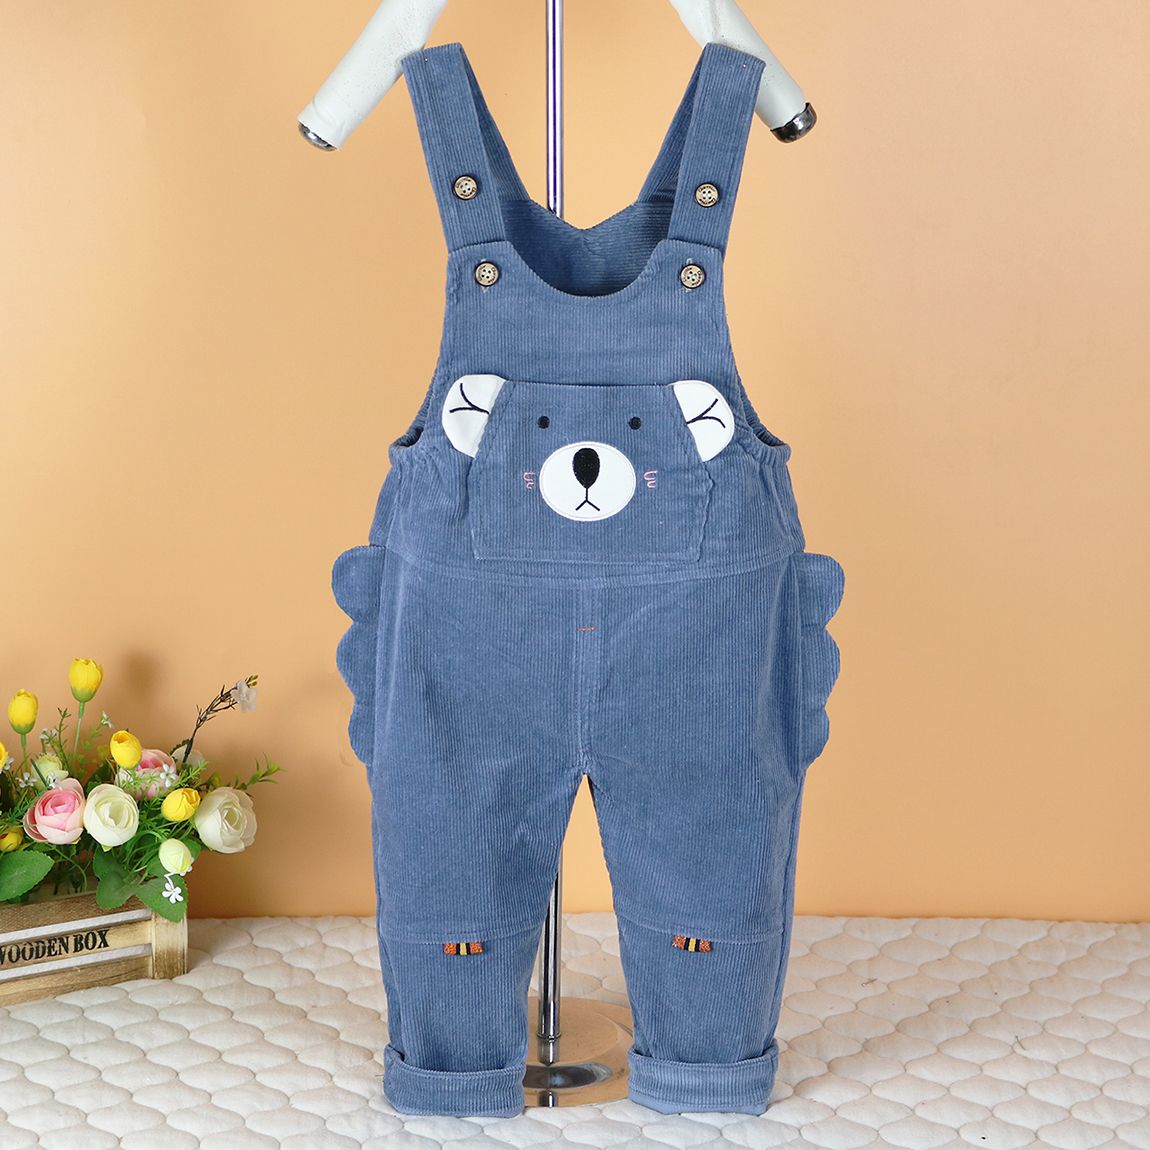 2021 new baby's back belt pants with elastic adjustable single layer pure cotton corduroy for boys and girls aged 1-3